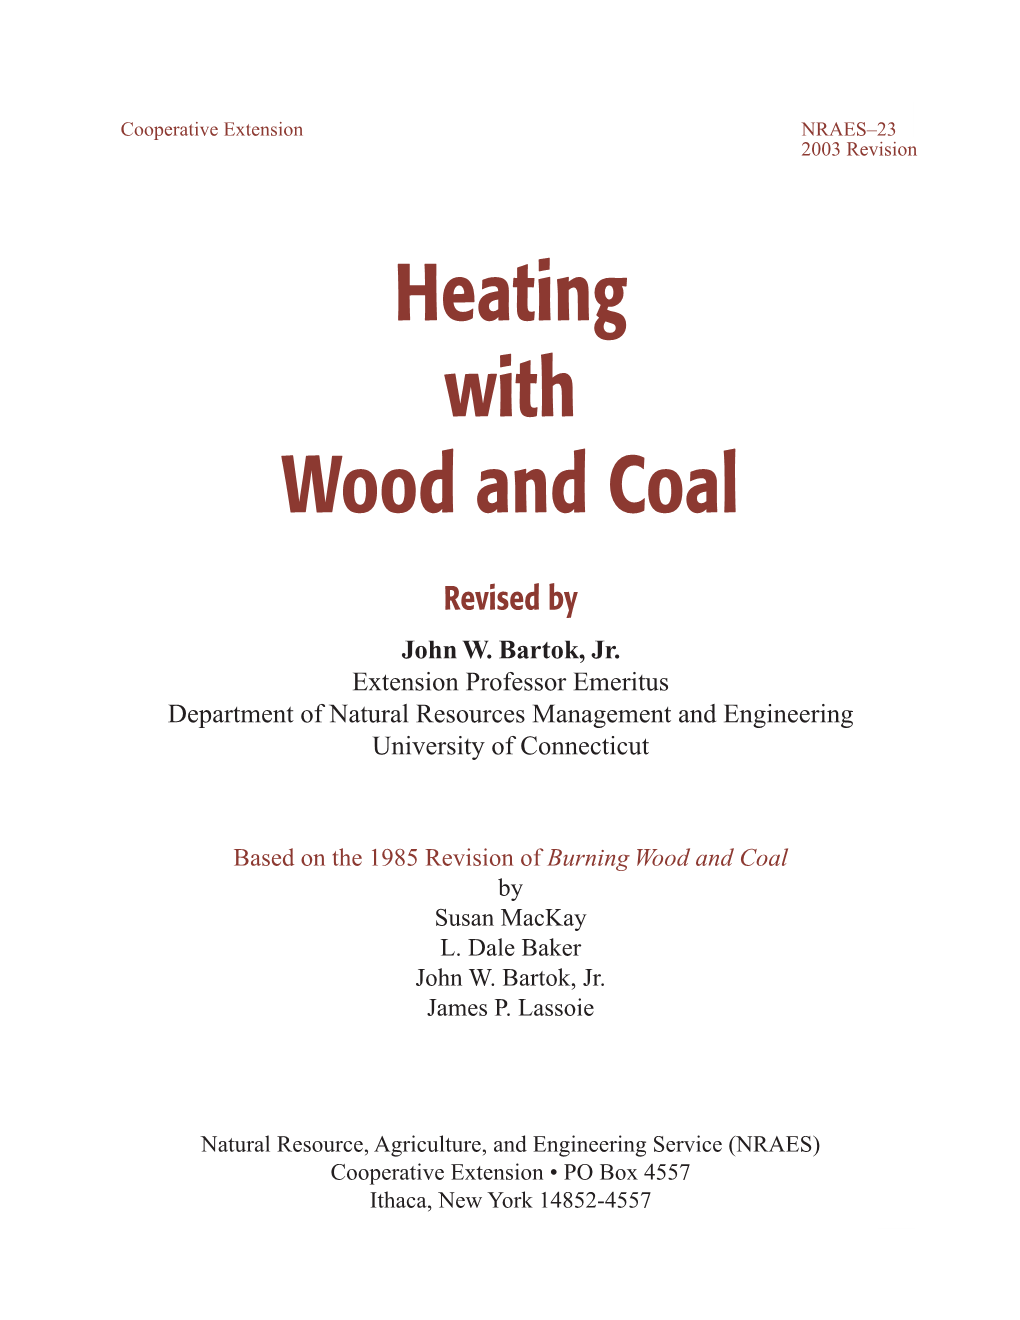 Heating with Wood and Coal